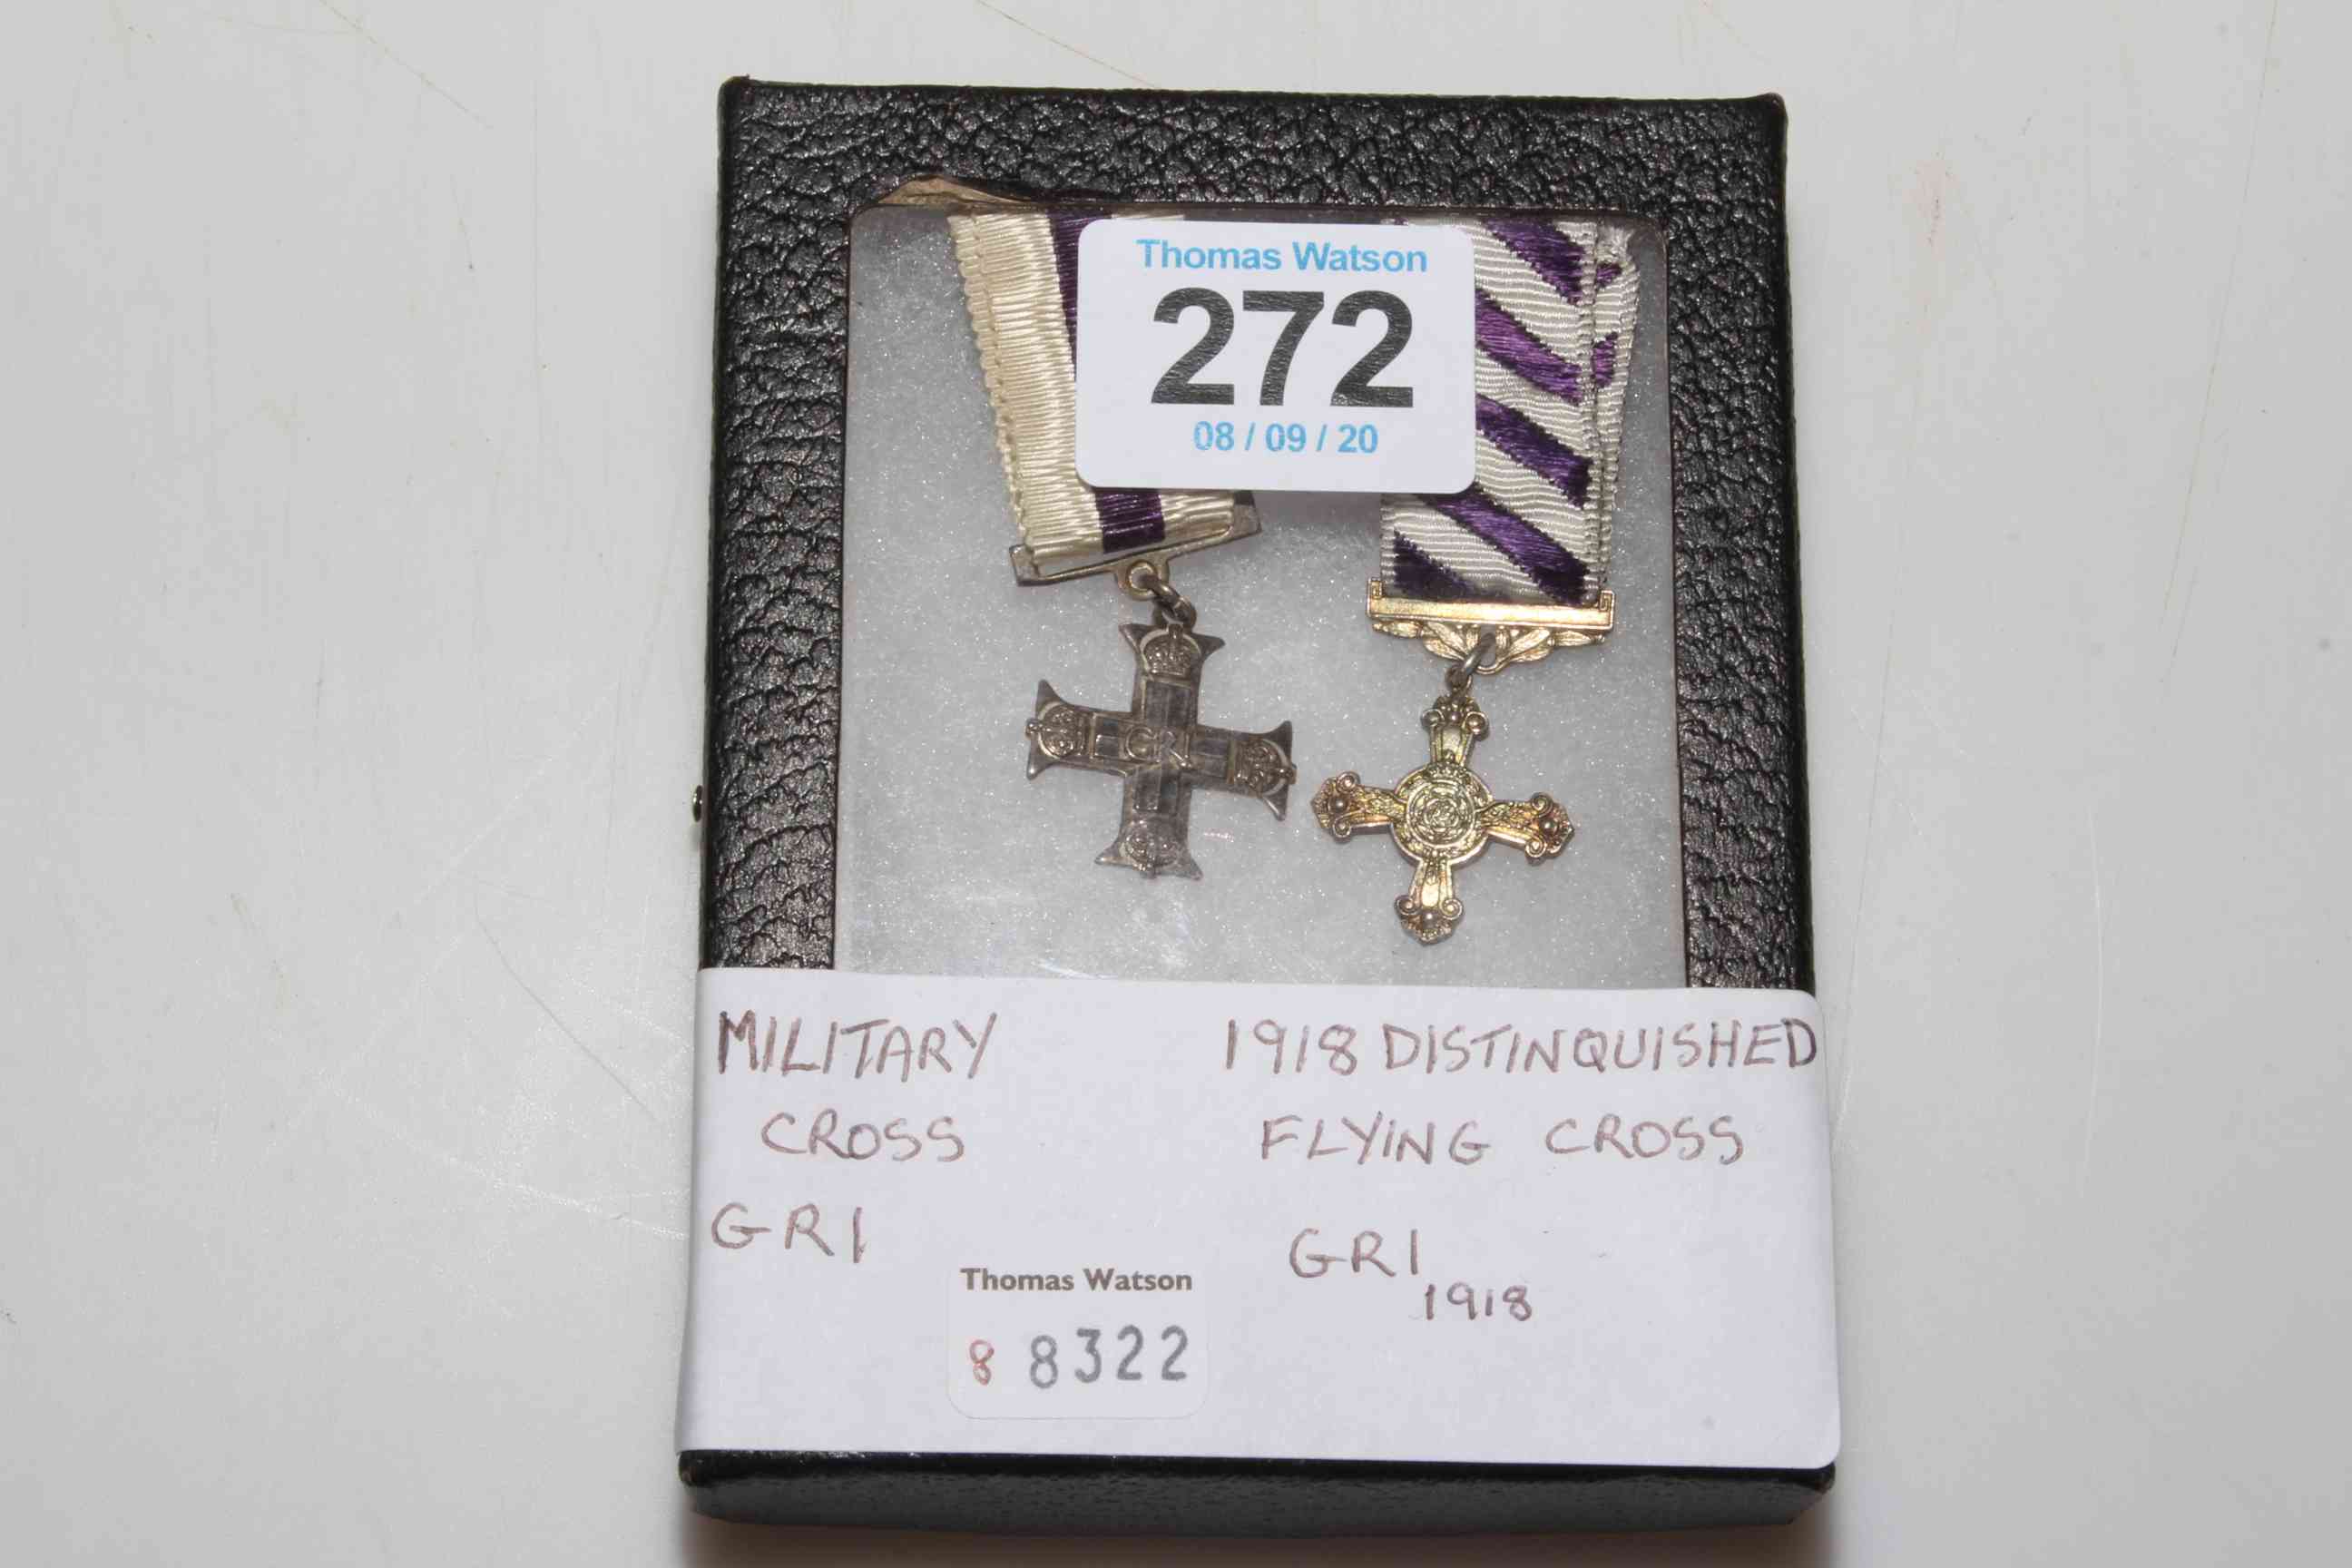 Miniature Military Cross GR1 and 1918 Distinguished Flying Cross GR1 (2).